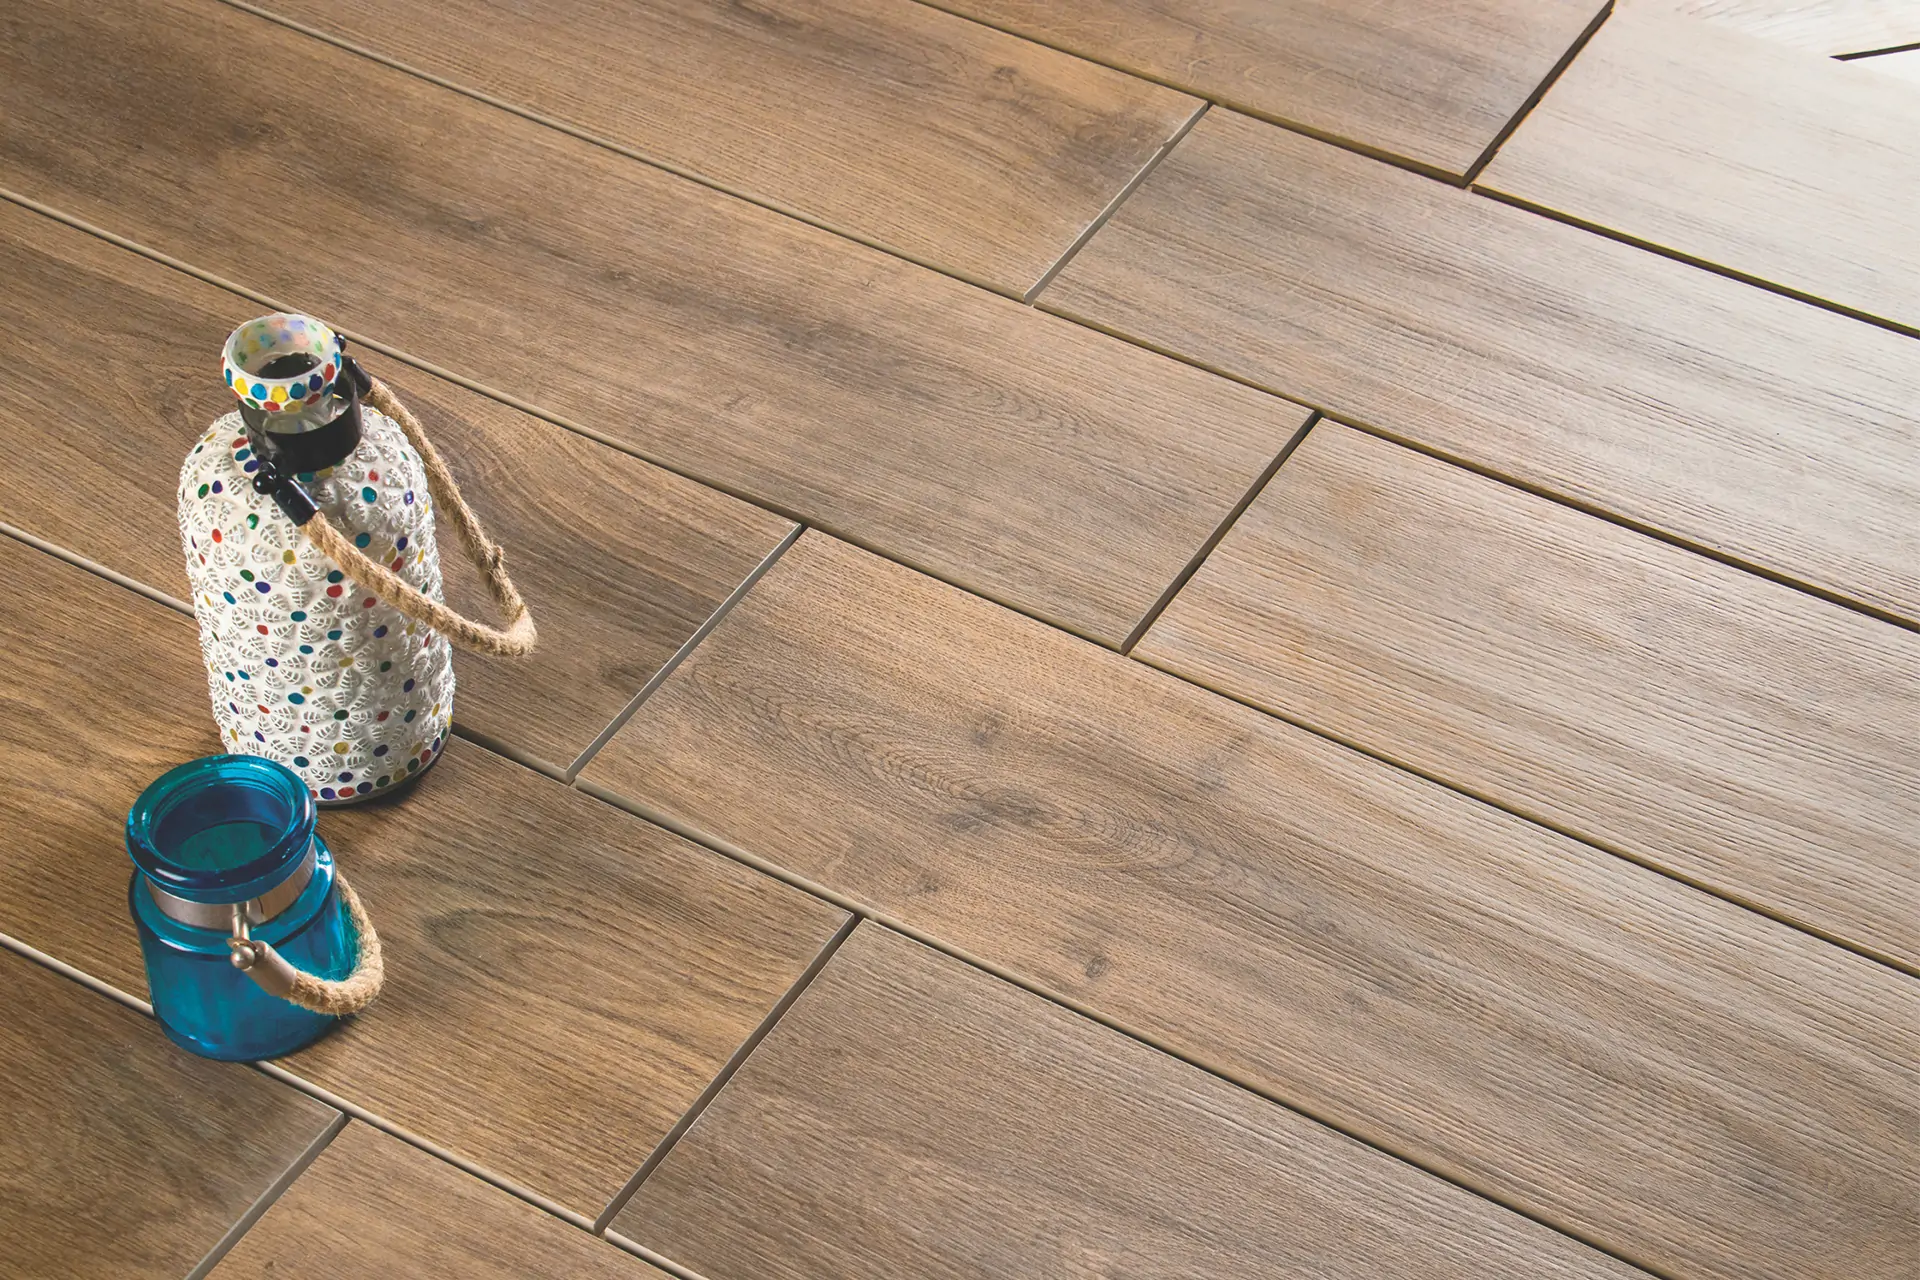 Elevate your surroundings with the <br />enduring beauty of Wooden Tiles